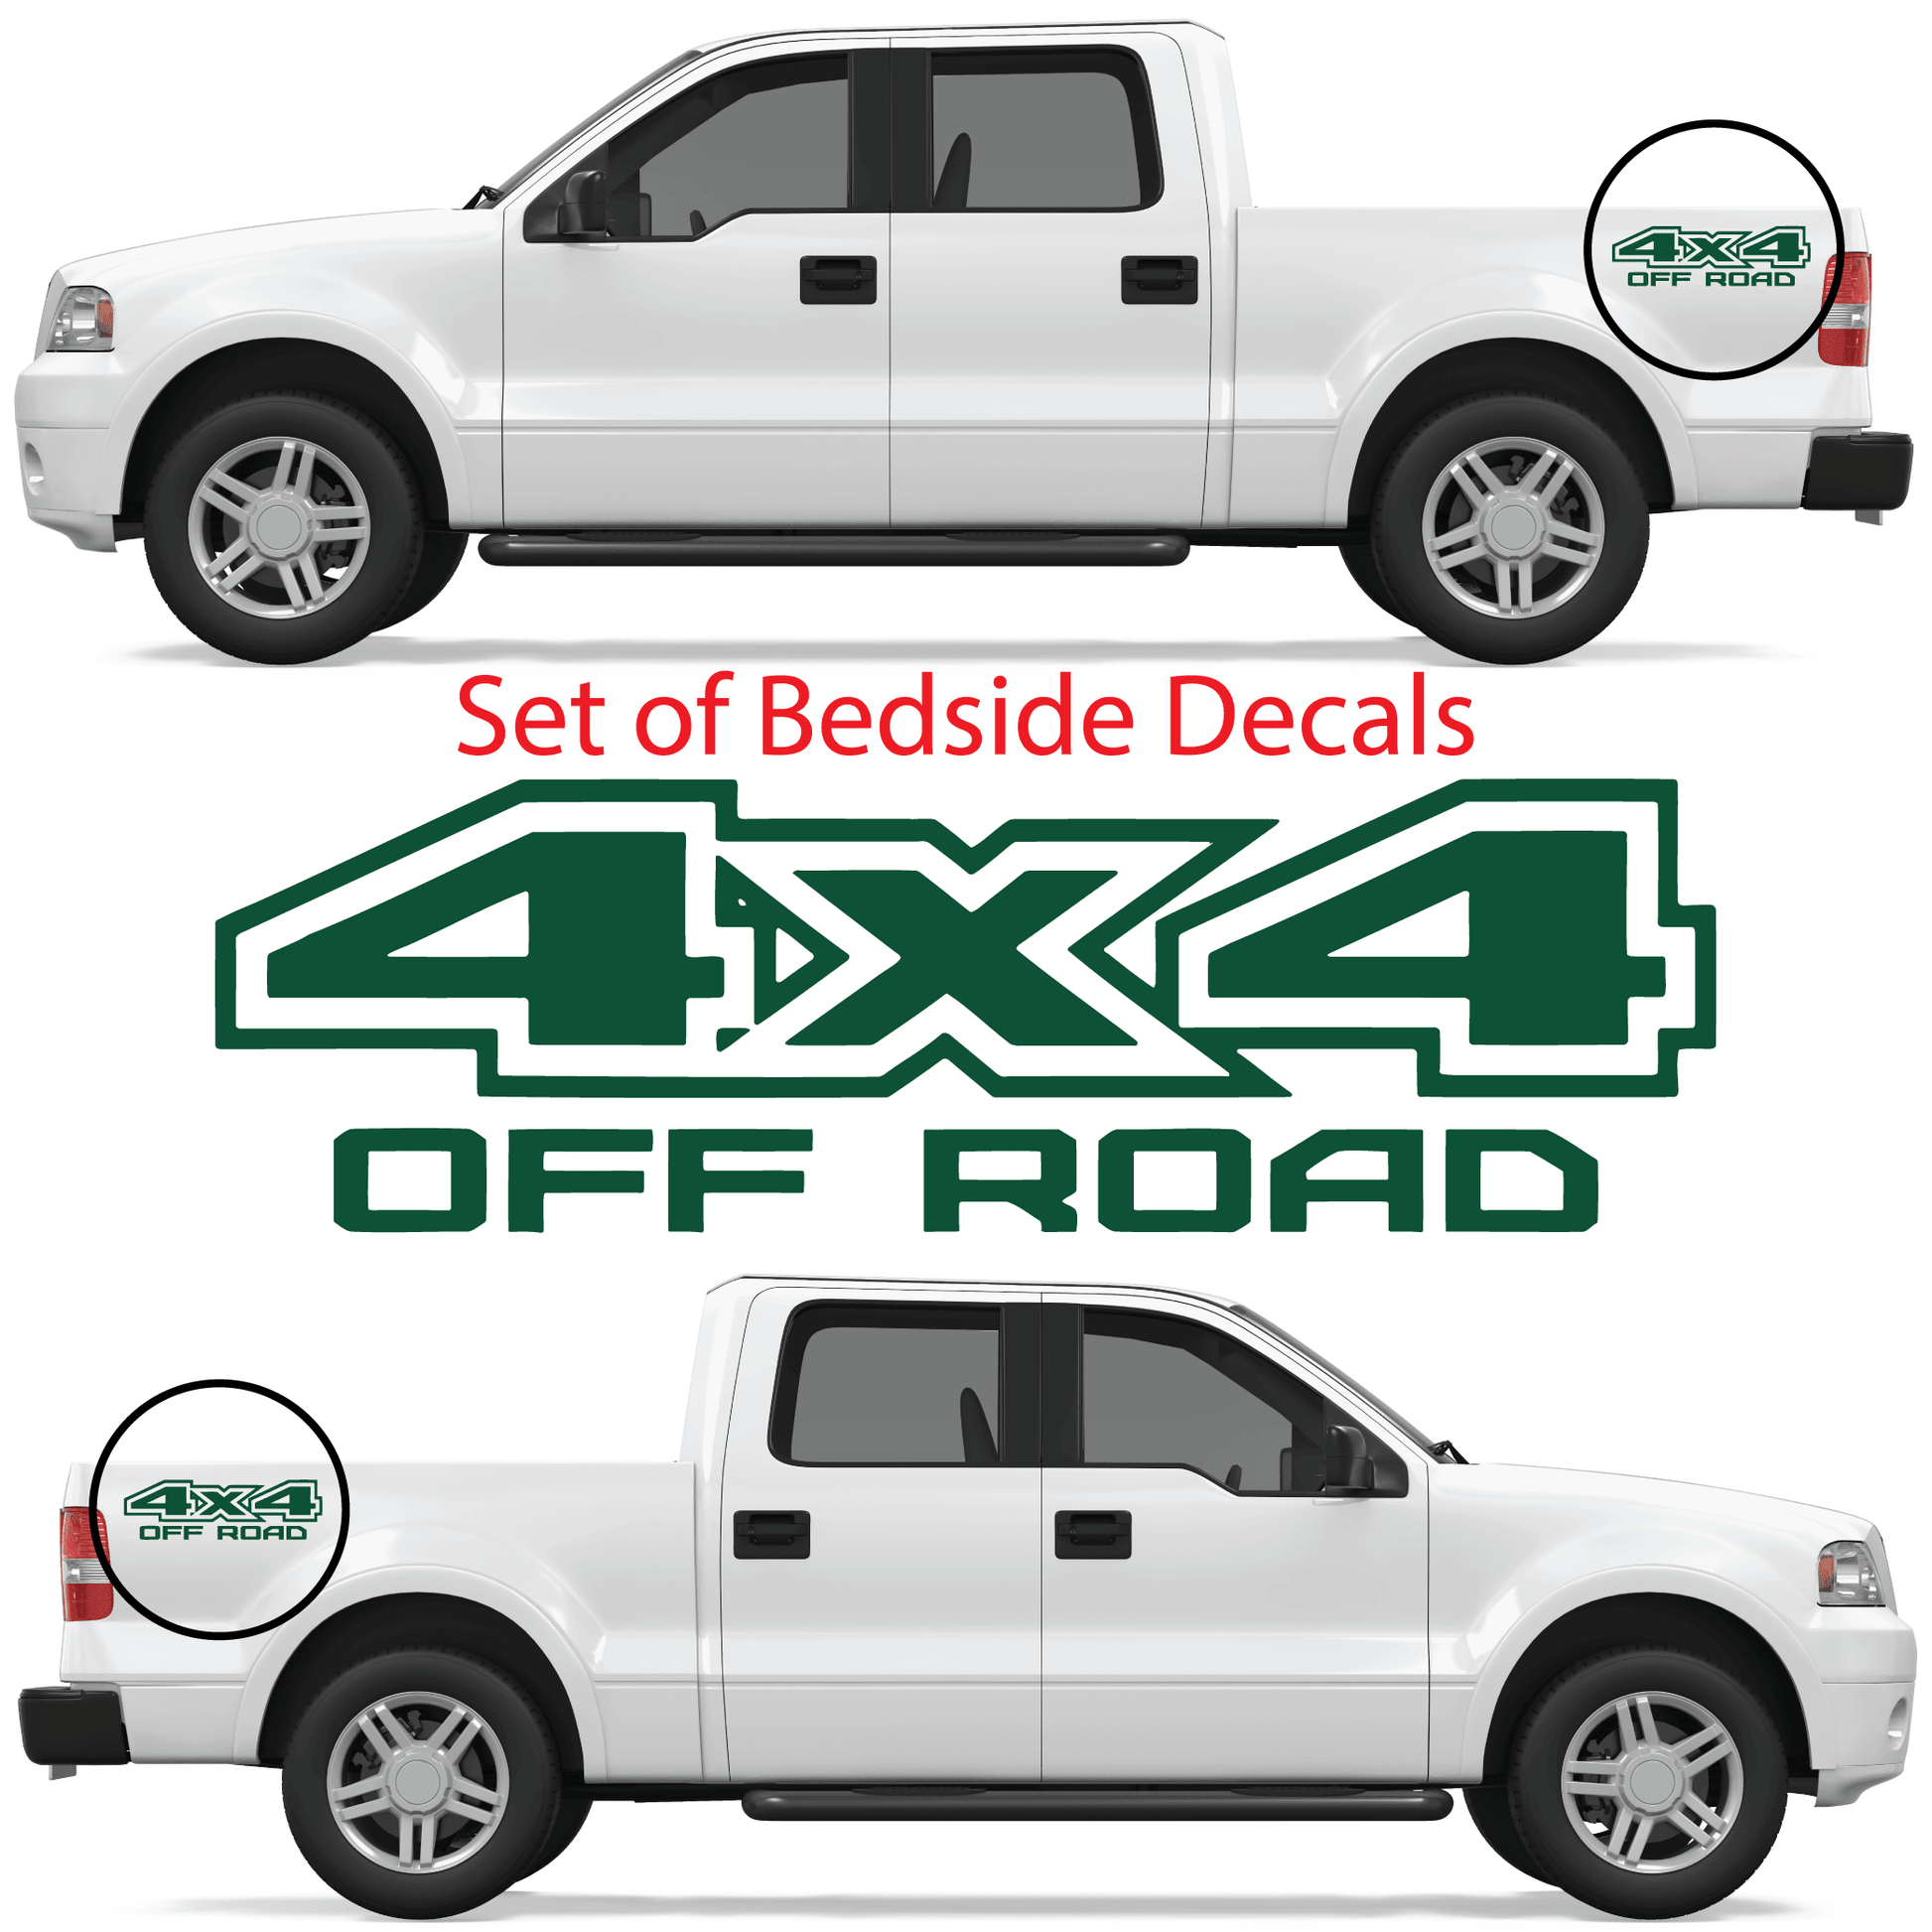 Shop Vinyl Design F-150 F-250 Trucks 4 x 4 Off Road Replacement Bedside Decals #05 Vehicle decal 001 Forest Green Gloss Shop Vinyl Design decals stickers